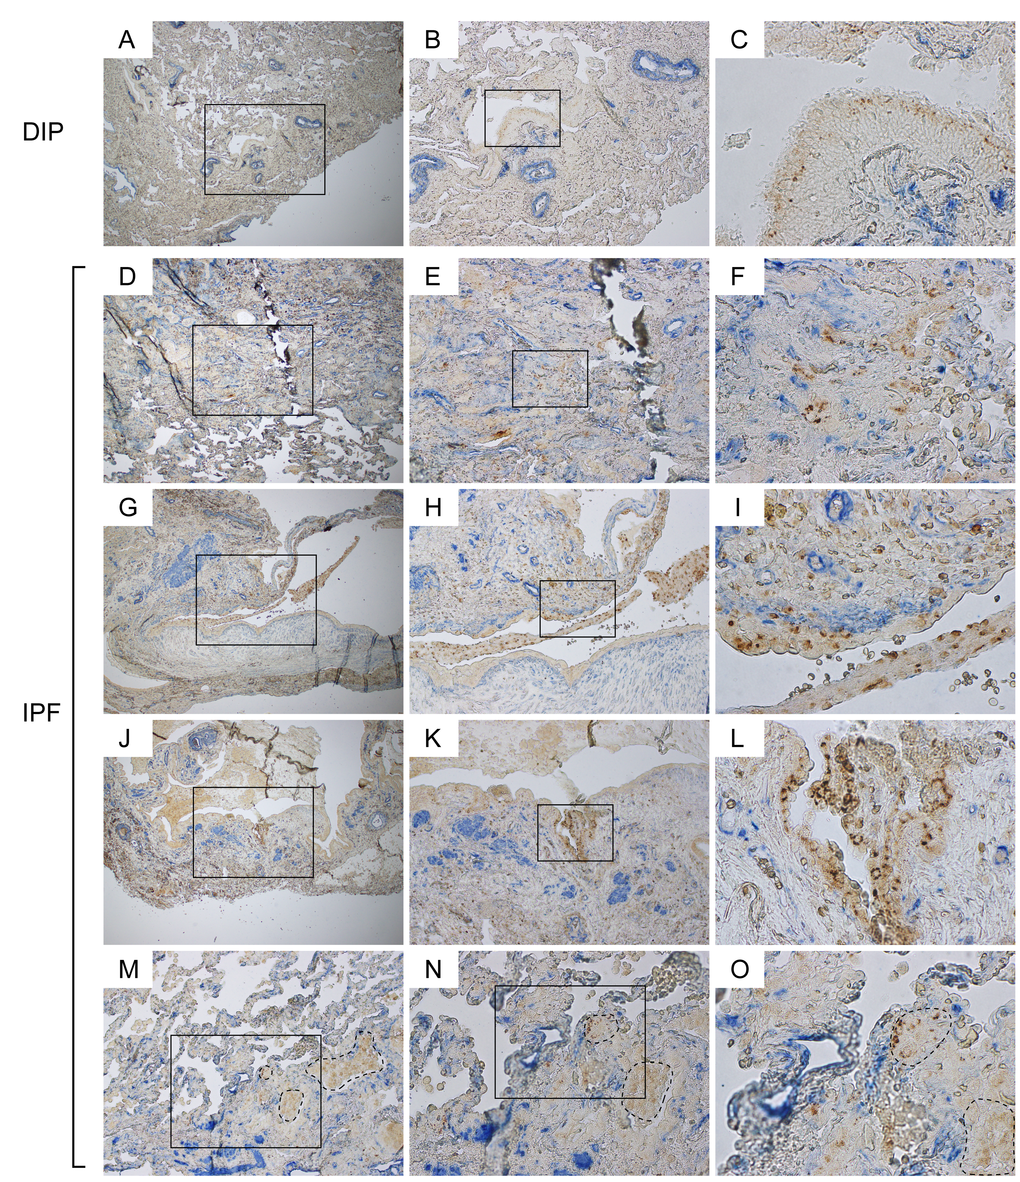 Aberrant α-SMA signals are frequently encountered in the vicinity of disorganized Claudin-10-positive cells in IPF lungs. IPF and DIP lung sections were immunohistochemically double-labeled for Cldn10 and α-SMA. Brown and blue signals correspond to Cldn10 and α-SMA respectively. (B, E, H, K, N) are magnified views of the boxed regions in (A, D, G, J, M) respectively. (C, F, I, L, O) are magnified views of the boxed regions in (B, E, H, K, N) respectively. (A, B, C) Representative photomicrographs from DIP lungs are shown. α-SMA signals are largely spotted beneath the arterial walls, where smooth muscle cells typically reside. No aberrant proximity is seen between Cldn10-positive cells and α-SMA signals. (D, E, F) Fibrotic interstitium showing aberrant α-SMA signals in close proximity to Cldn10-positive club cells. Note the juxtaposition of Cldn10-negative cuboidal cells with Cldn10-positive cells and aberrant α-SMA signals (F). (G, H, I) Mosaic cell masses containing Cldn10-positive and negative cells are floating in an enlarged airspace. Cldn10-positive club cells infiltrating the fibrotic interstitium (I). (J, K, L) Cldn10-positive club cells form multilayers in bronchiolar epithelium (L) in close proximity to intense α-SMA signals (K). (M, N, O) Boundary region between normal-looking alveoli and moderately affected area with thickened interstitium is shown. Areas surrounded by dashed lines denote mosaic cell masses containing Cldn10-positive and negative cells. Apparently, those cell masses have occluded the alveolar airspaces. Original magnifications: x40 (A, D, G, J); x100 (B, E, H, K, M); x200 (N); x100 (C, F, I, L, O).